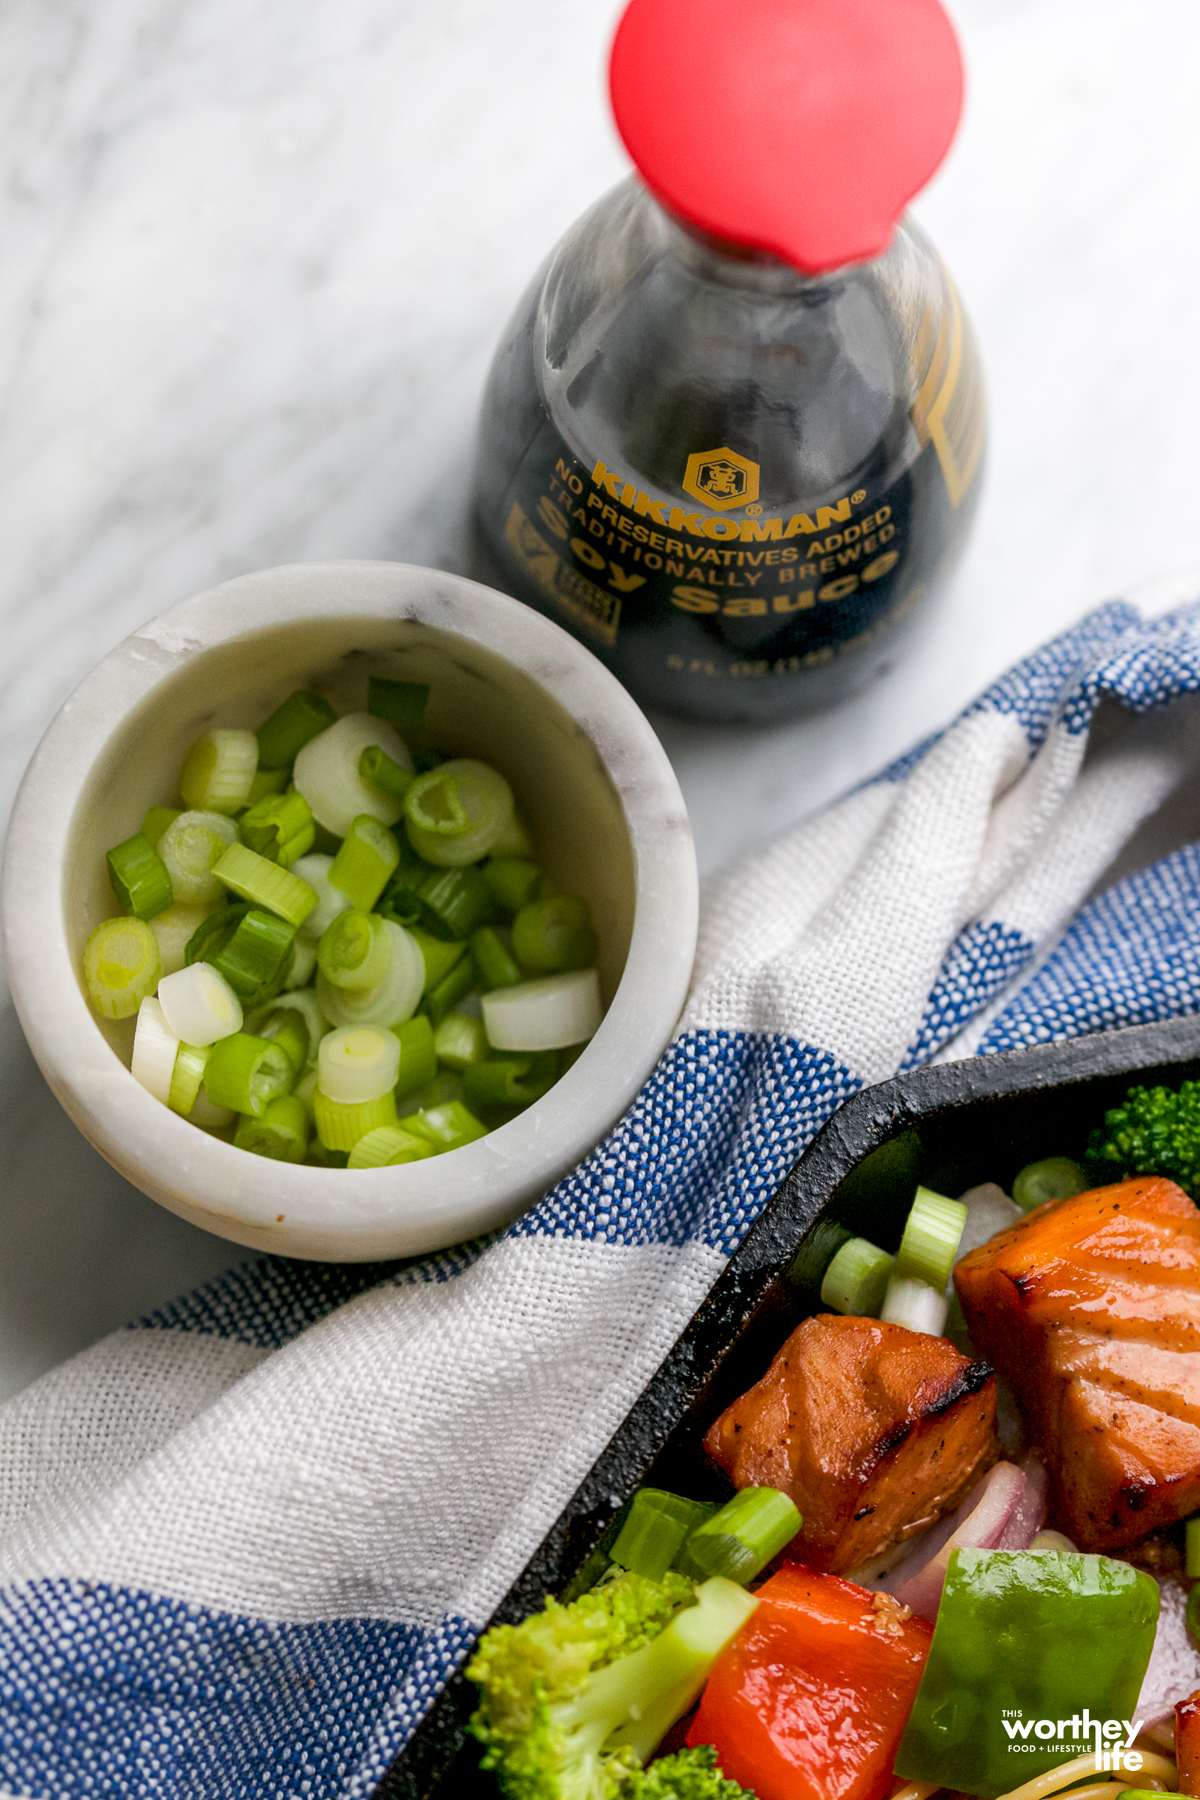 green onions in a white bowl next to a bottle of soy sauce with a red top